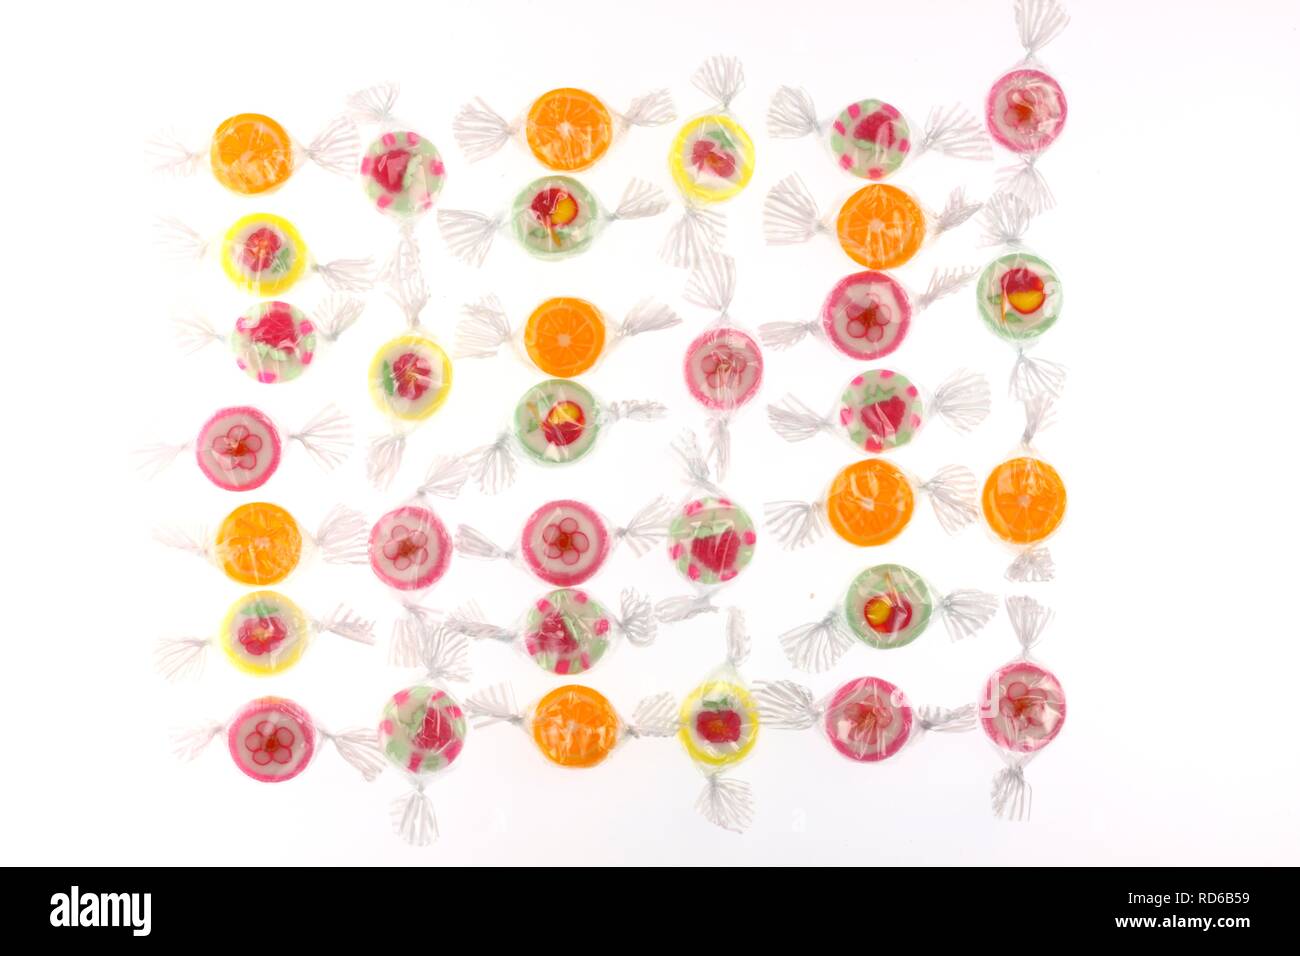 Boiled sweets or drops with different motifs Stock Photo